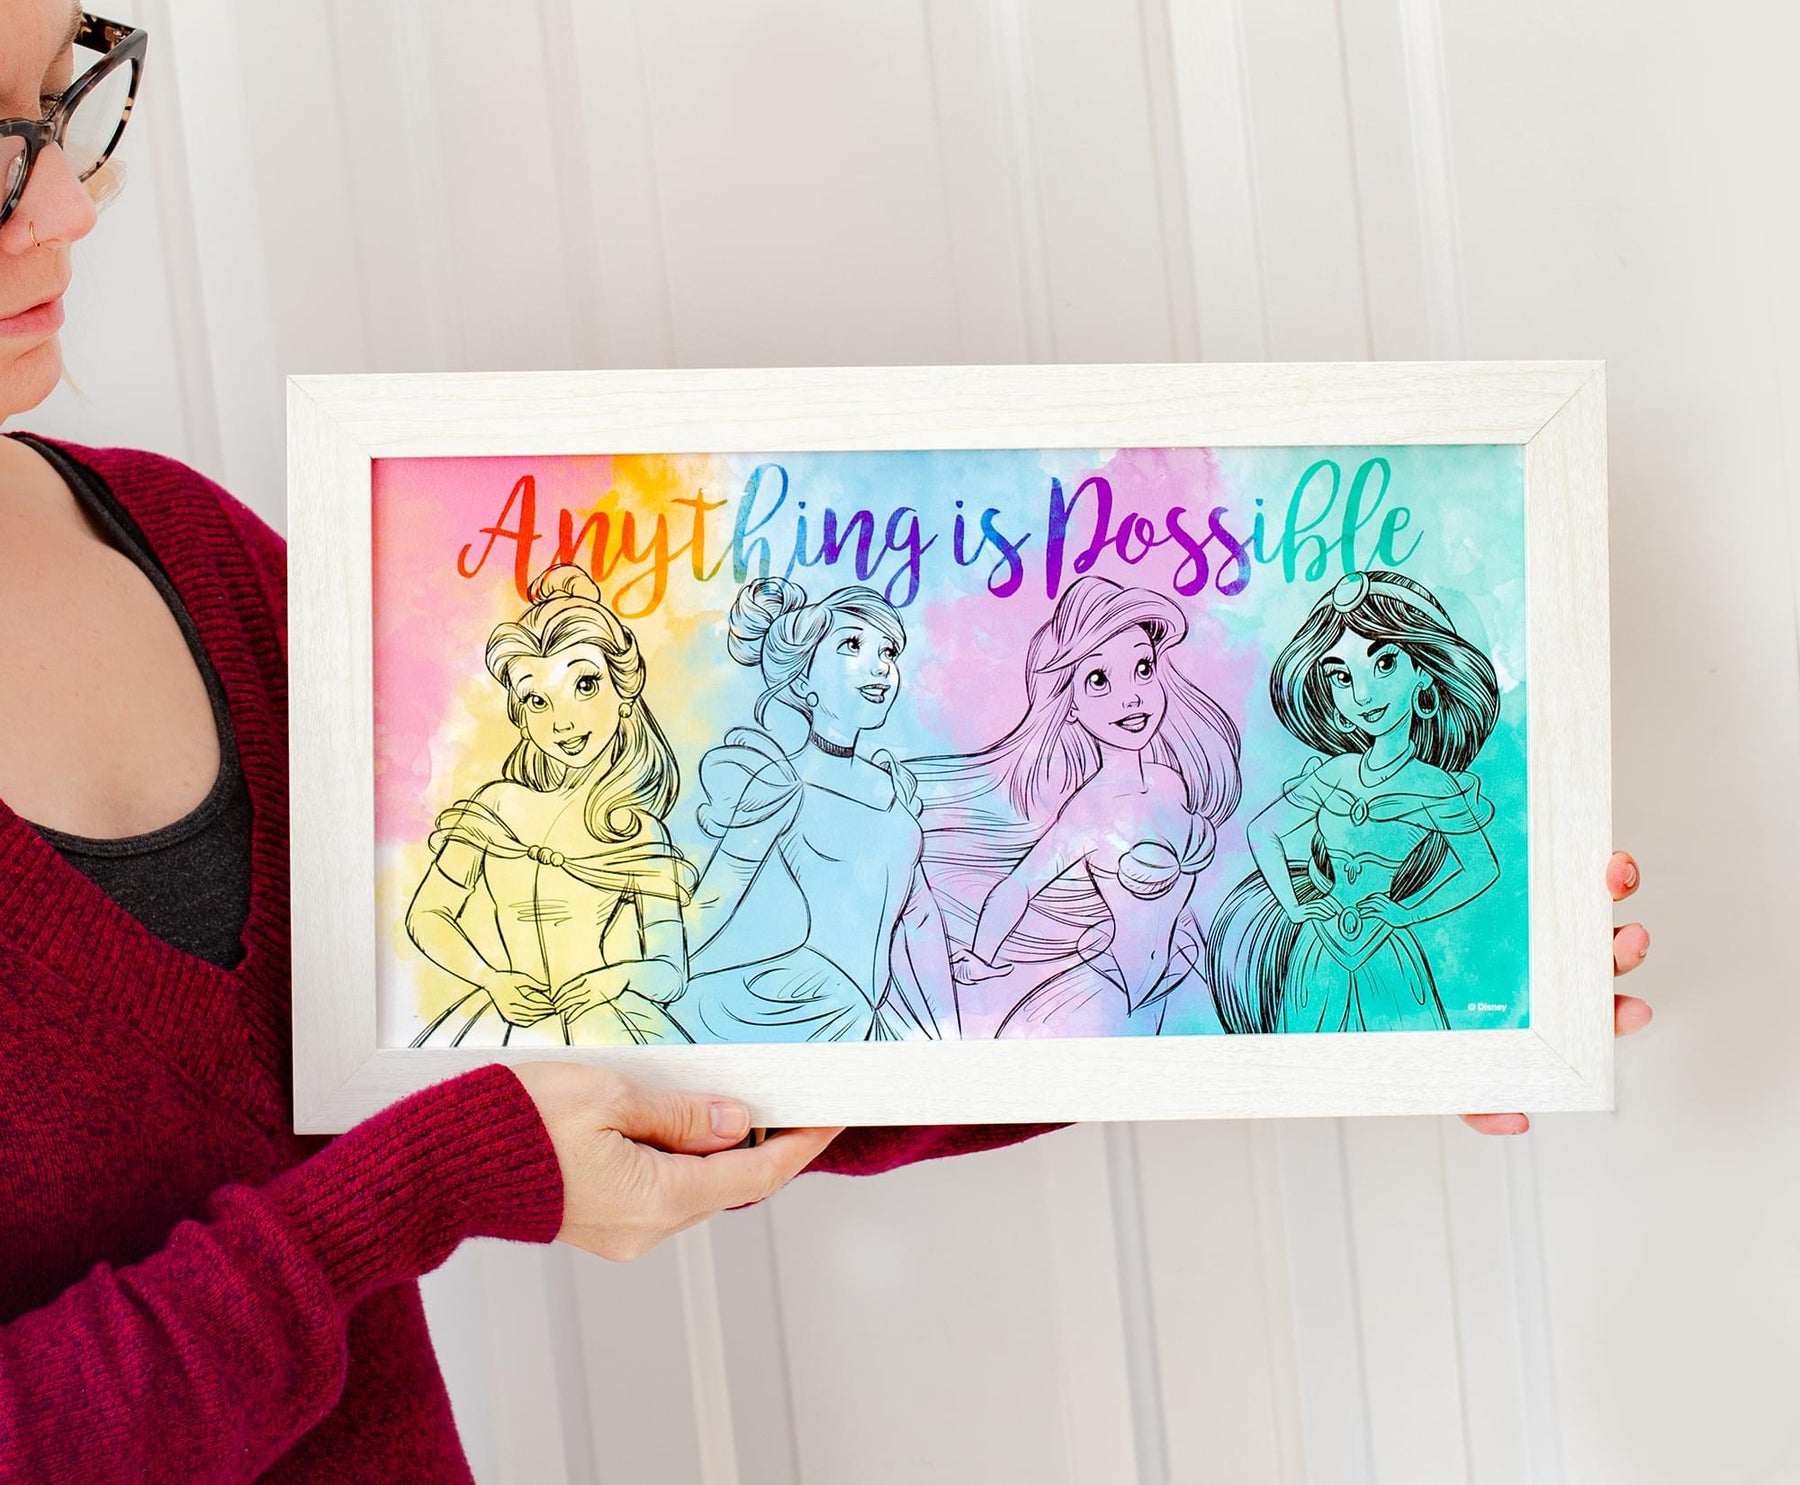 Disney Princess "Anything Is Possible" Wooden Hanging Wall Art | 10 x 18 Inches